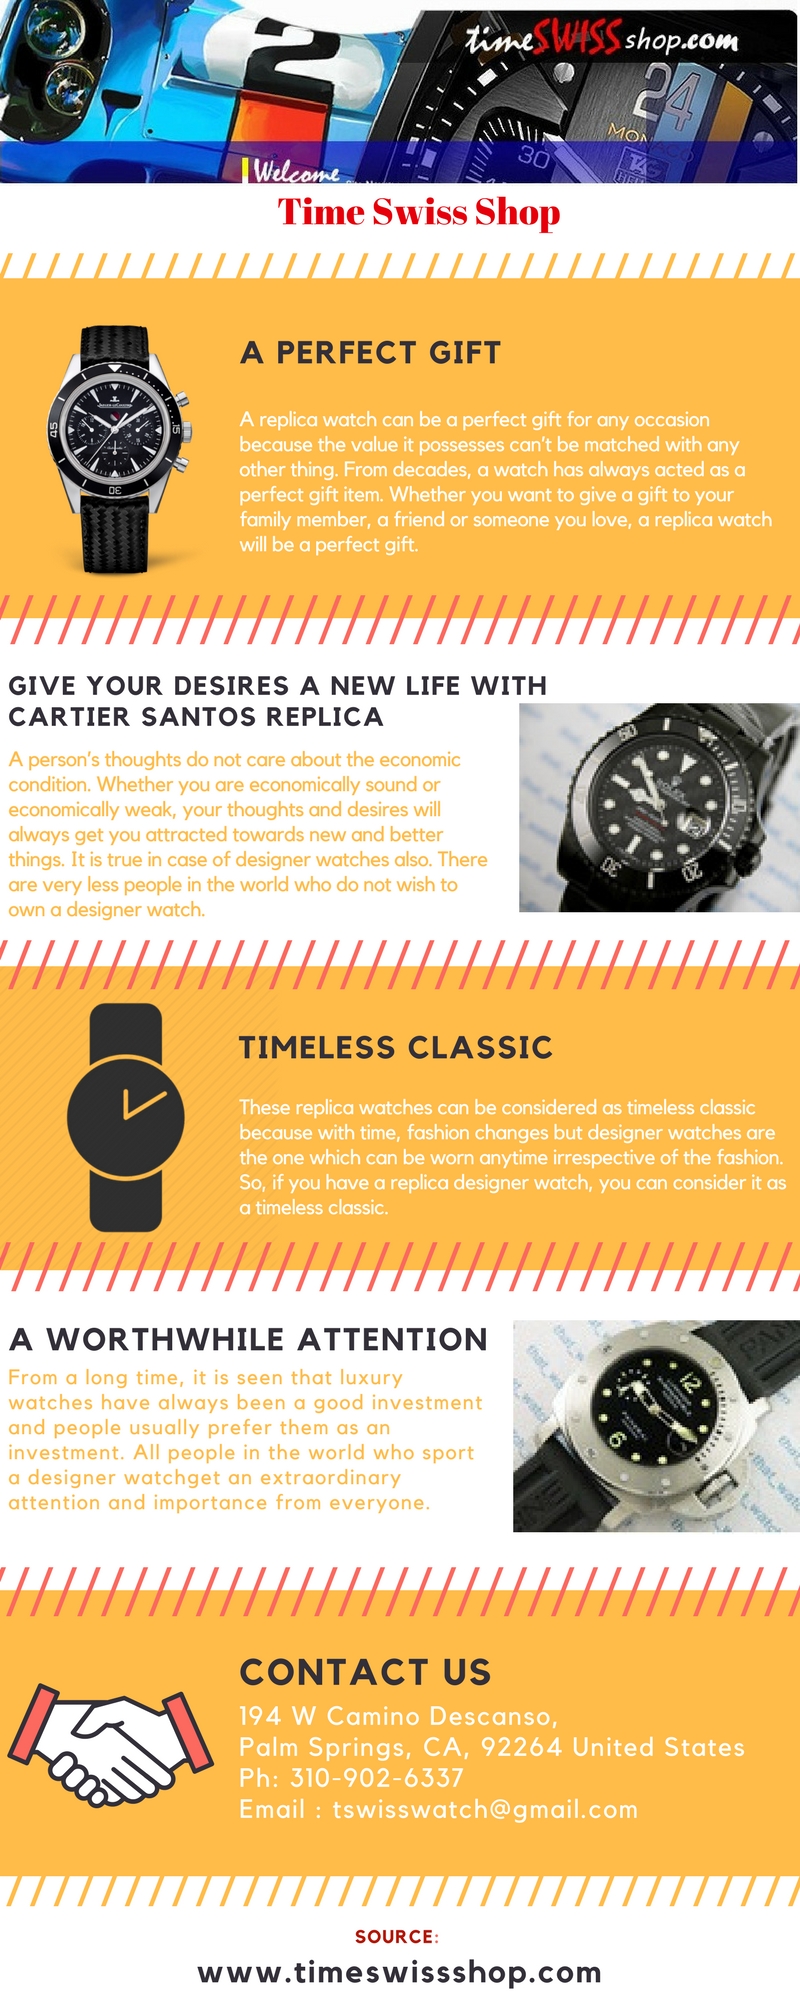 Replica Watch TimeSwissshop.com is an online replica watch store to buy all kinds of quality replica watches such as Bronzo Replica, Intime, Puretime and many more. View Replica Watch Reviews here on Replica Blog. For more info at http://www.timeswissshop.com
 by Timeswissshop